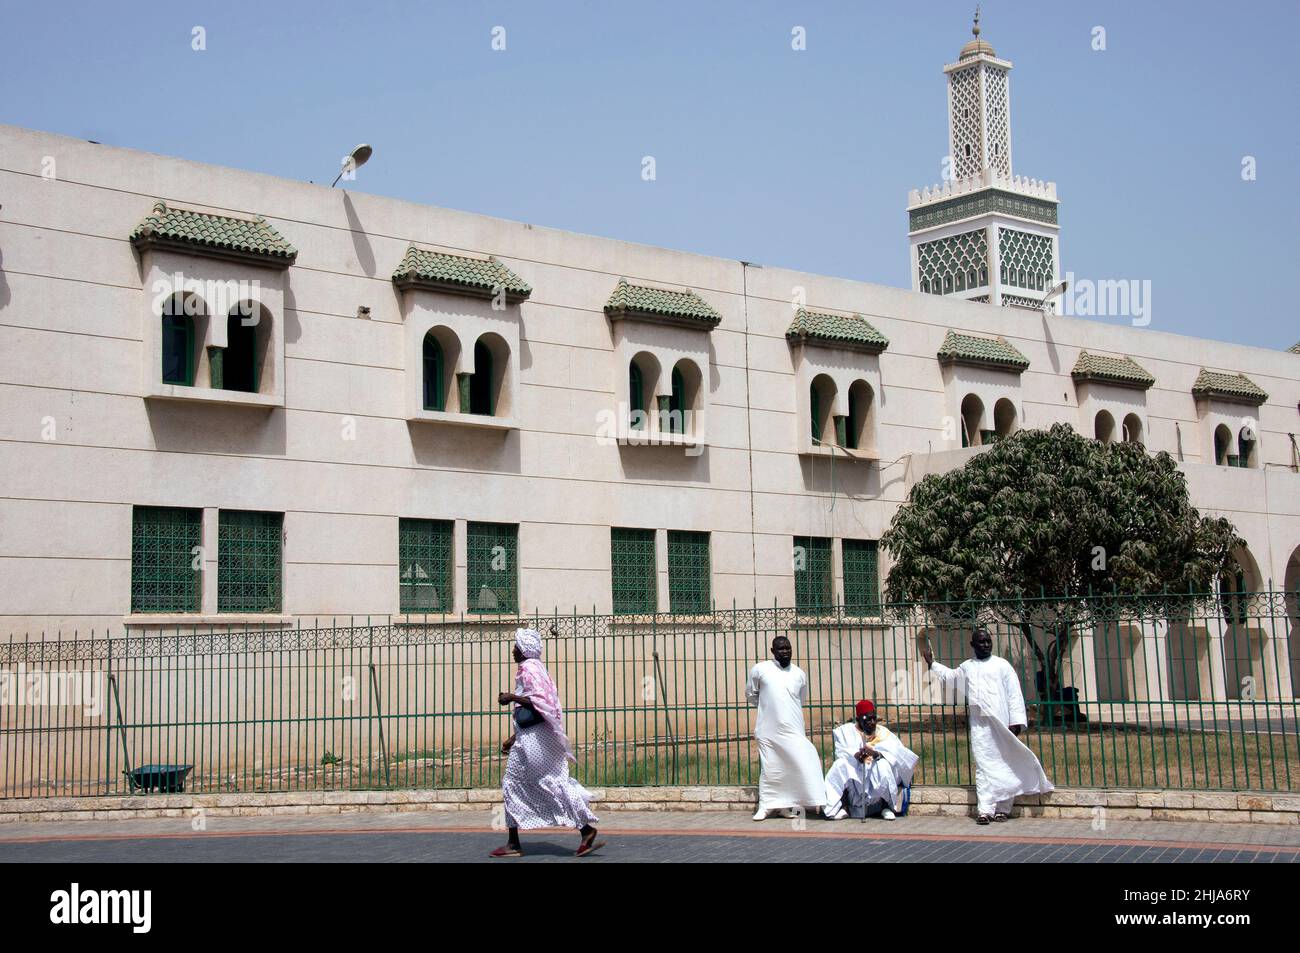 Group of people outside the Great Mosque of the city of Dakar in Senegal Stock Photo